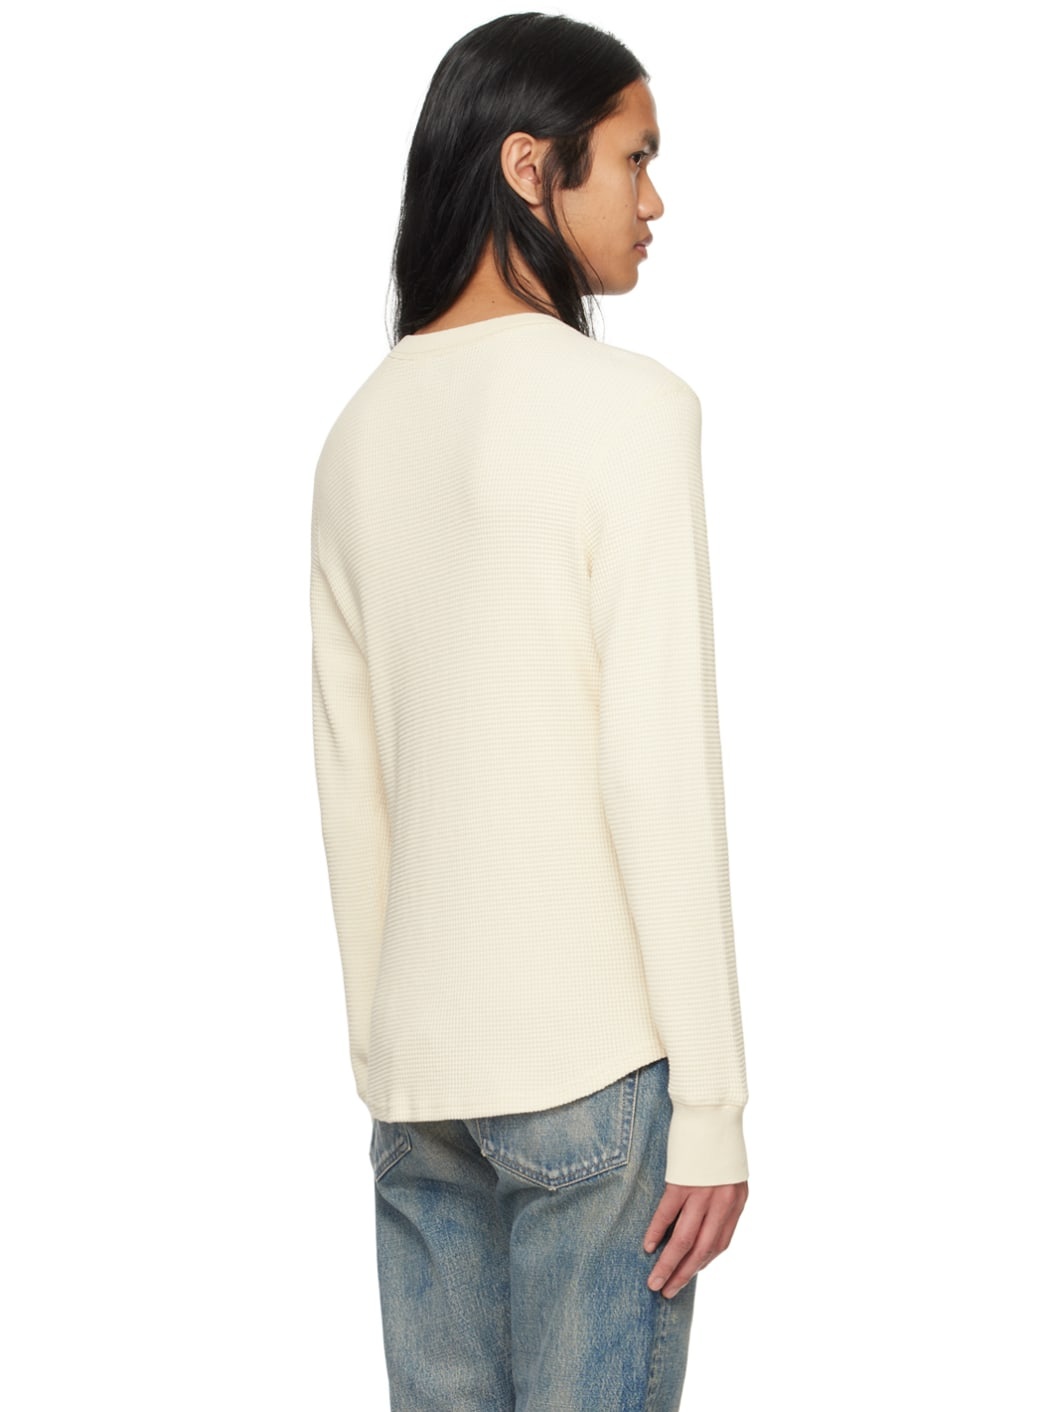 Off-White Thermal Long Sleeve T-Shirt - 3